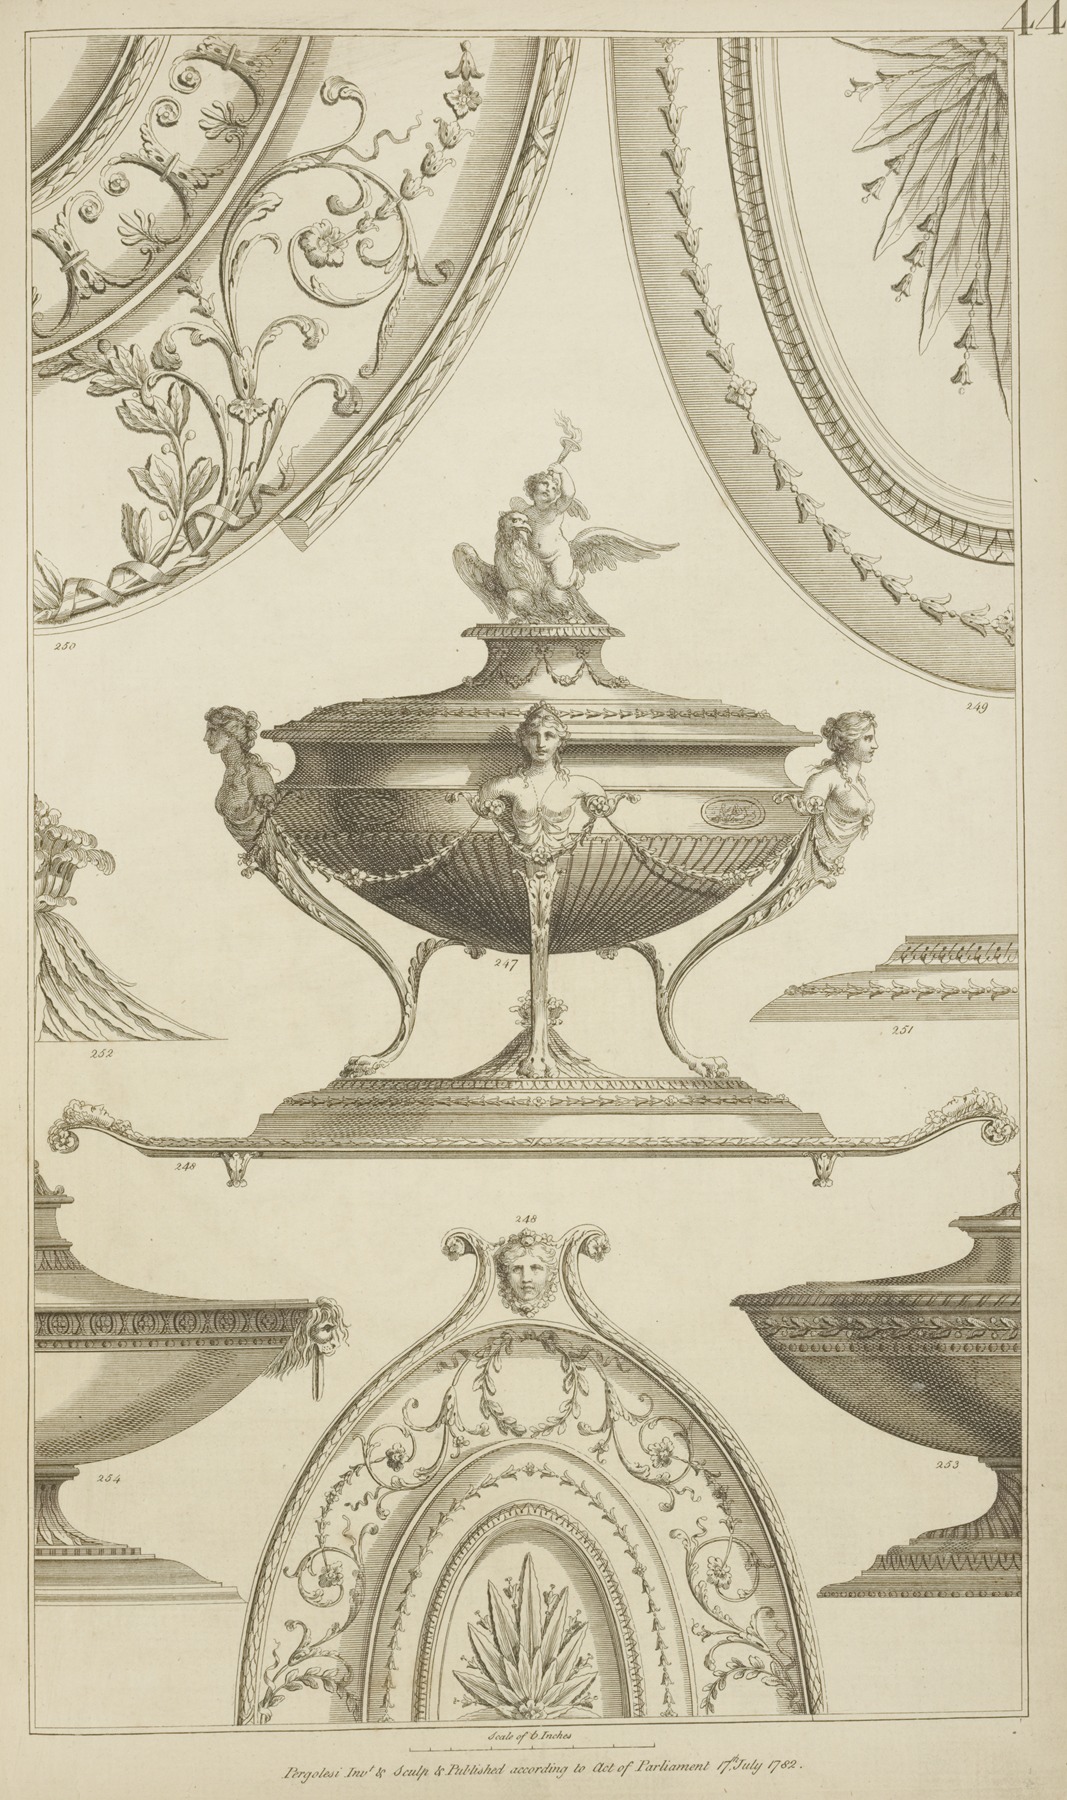 Michel Angelo Pergolesi - Central design of urn with designs of women’s torsos and cherub and eagle on the lid.